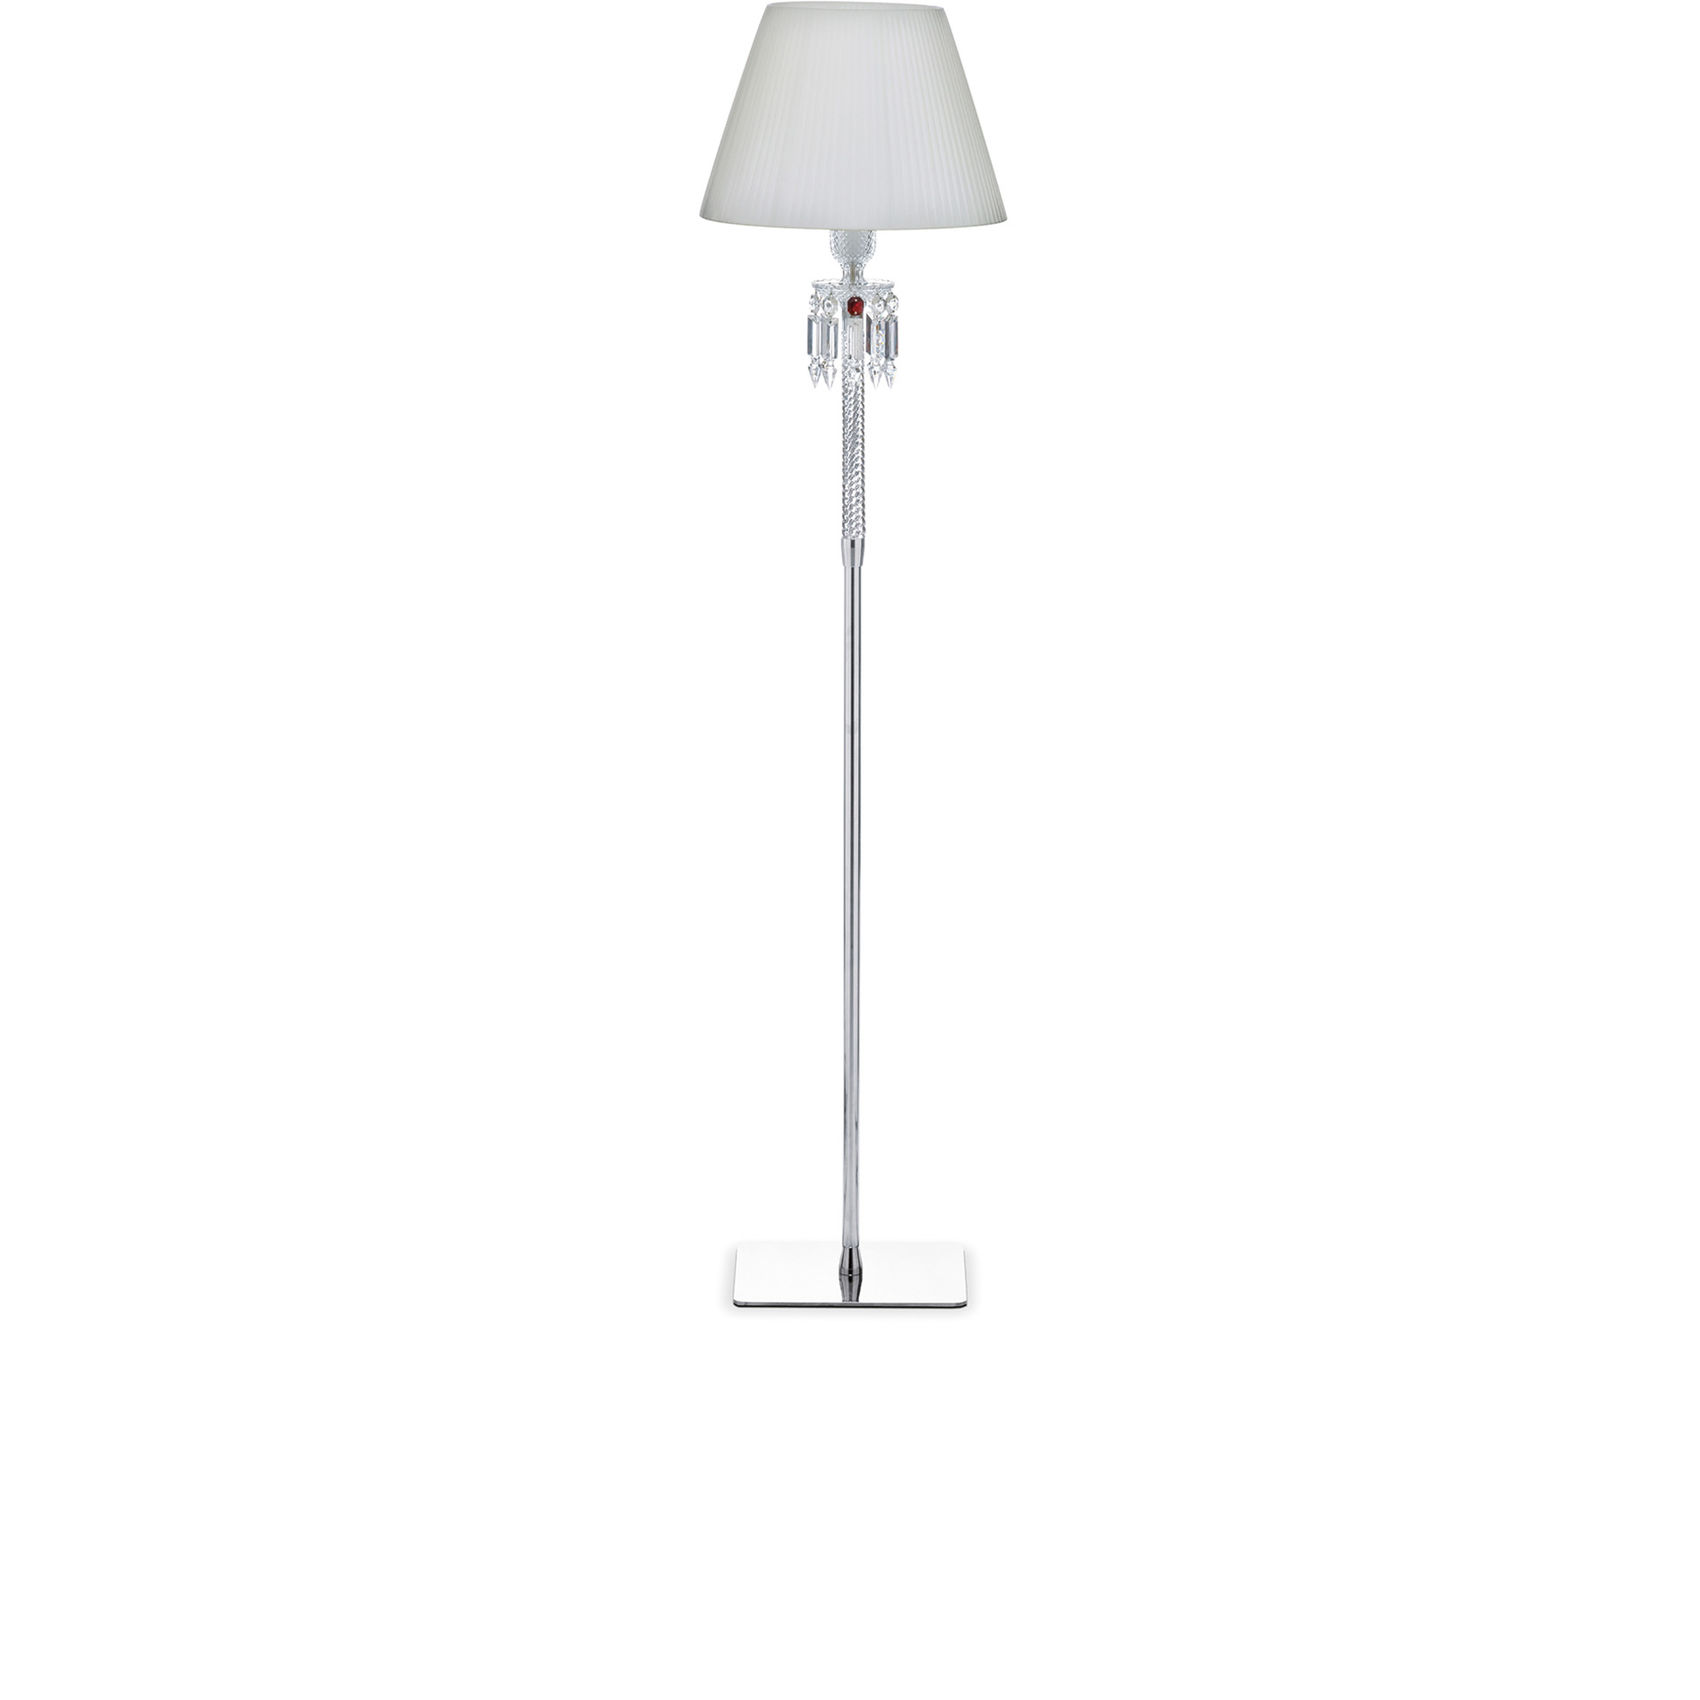 2604550 CEI - TORCH SMALL FLOOR LAMP